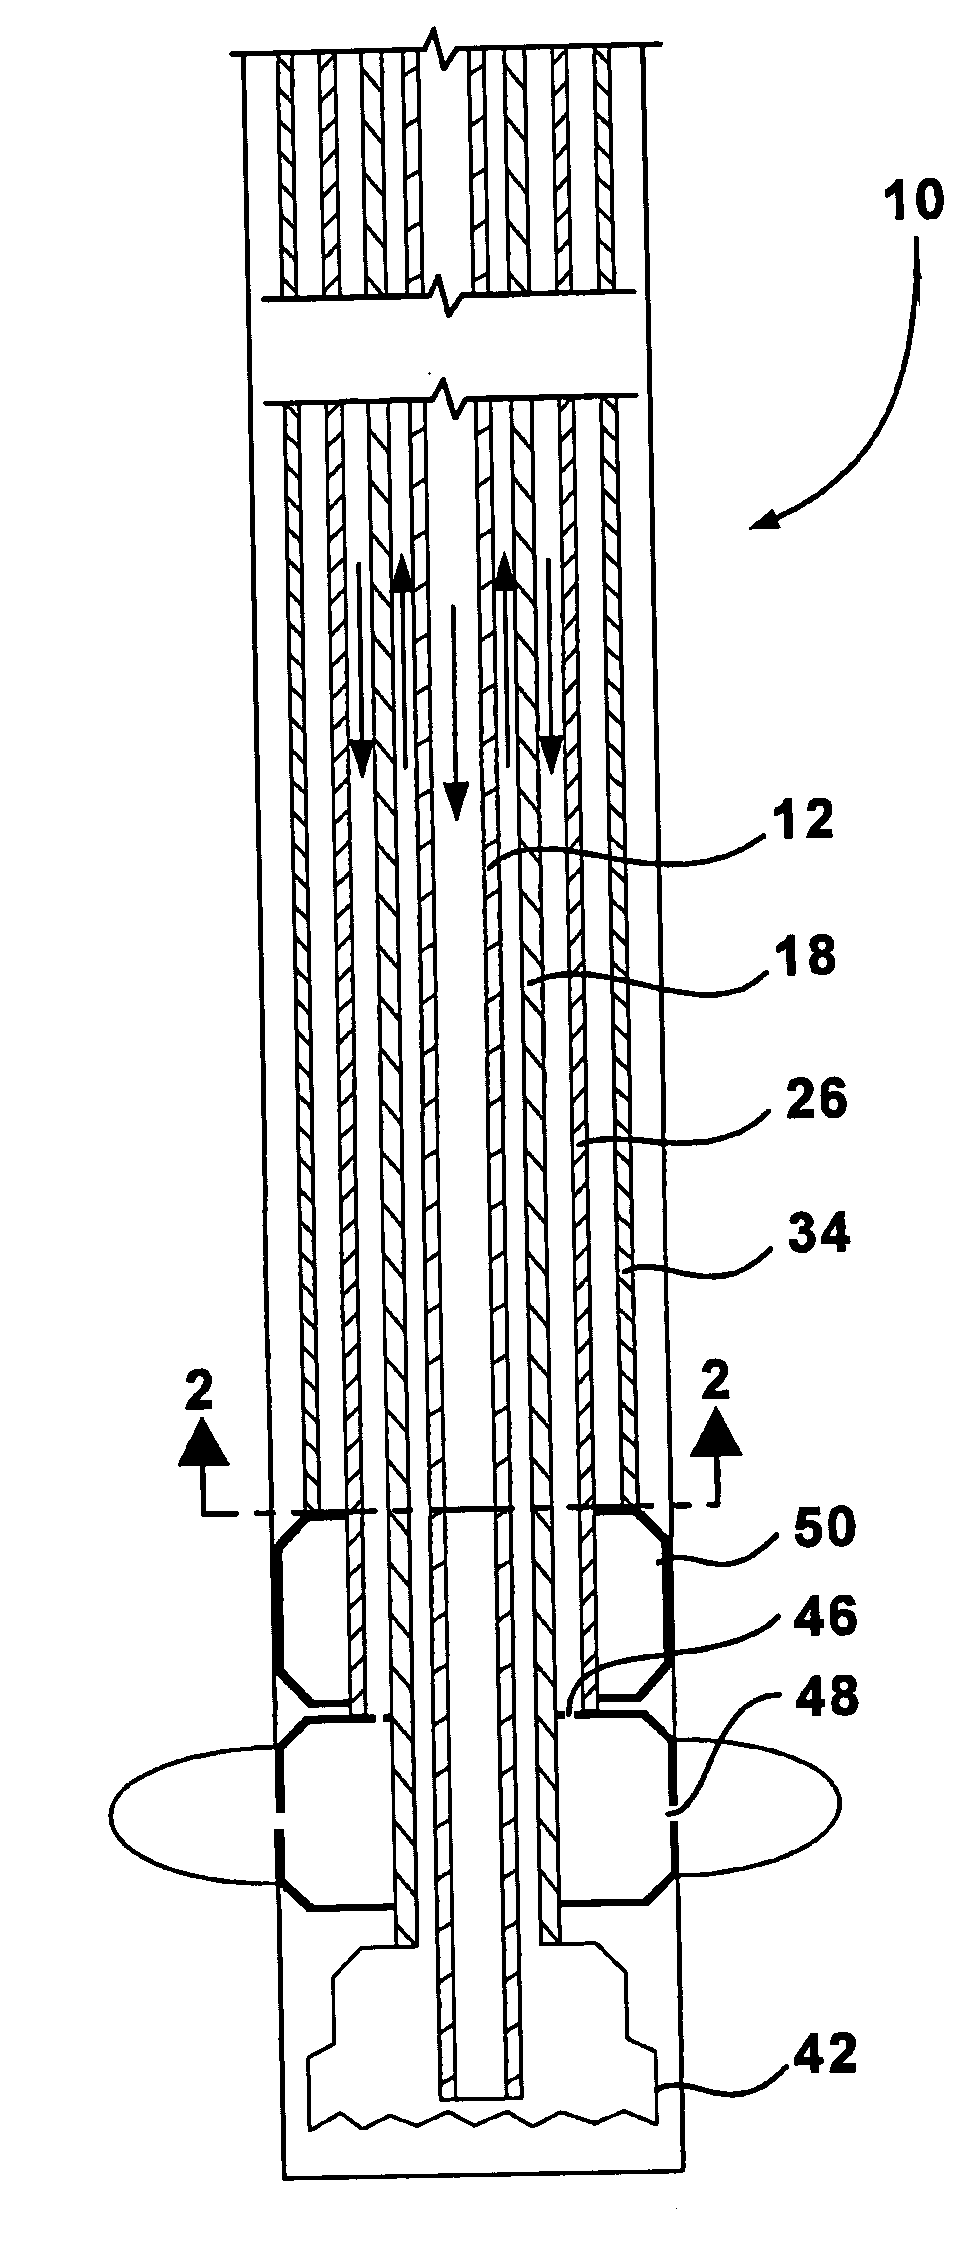 Method and apparatus for treating a productive zone while drilling